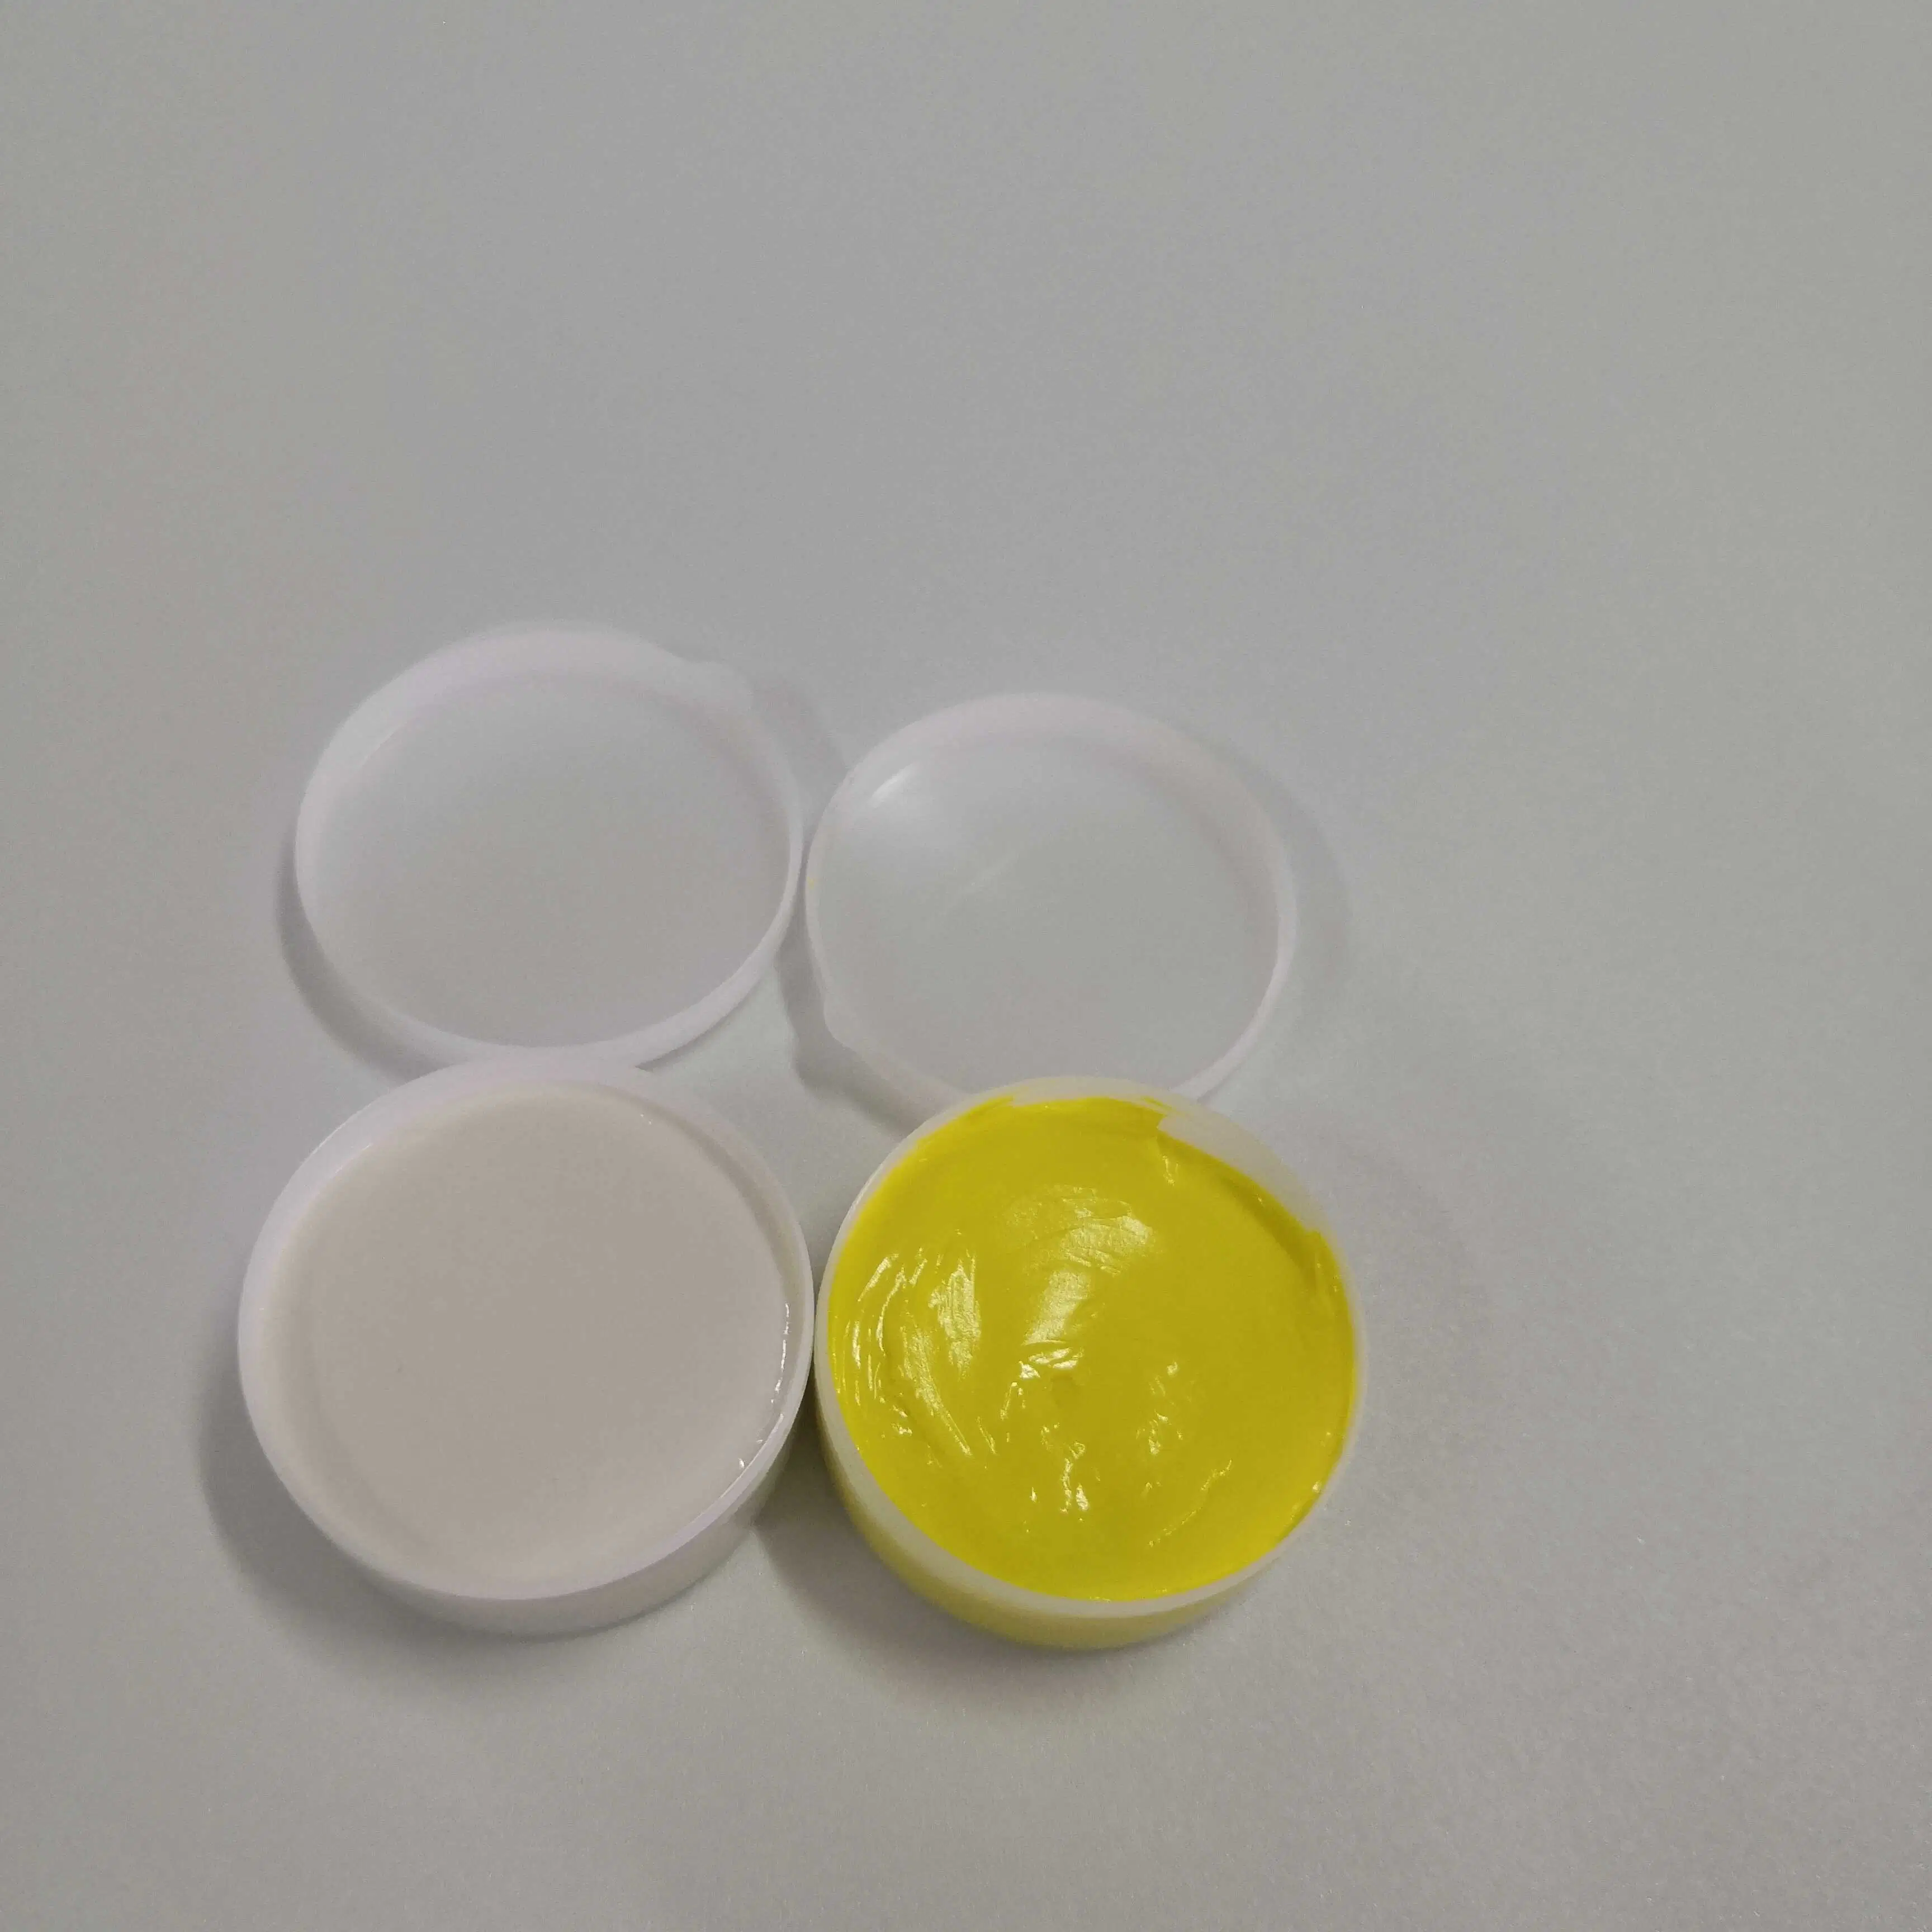 Hochey Medical Dental Silicone Impression Material with Cheap Price